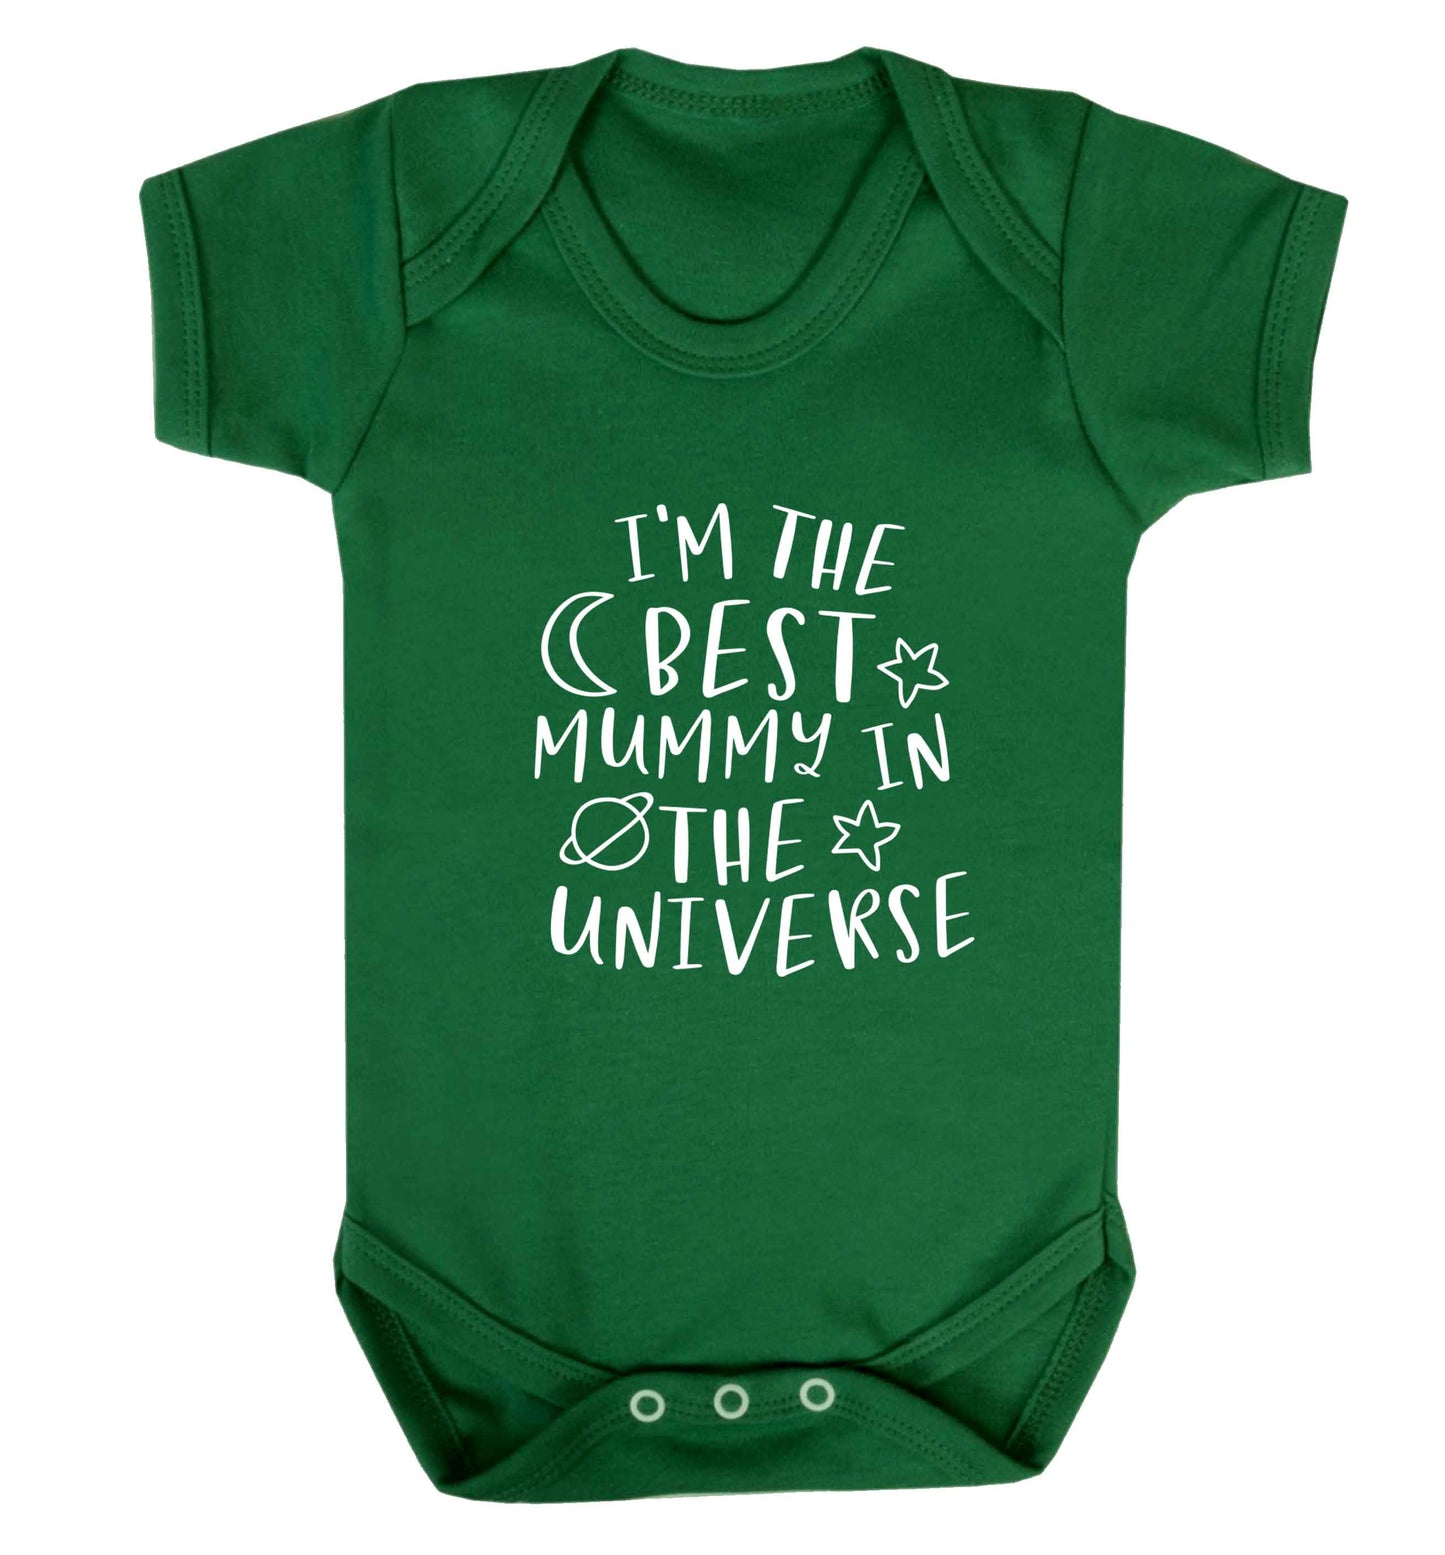 I'm the best mummy in the universe baby vest green 18-24 months